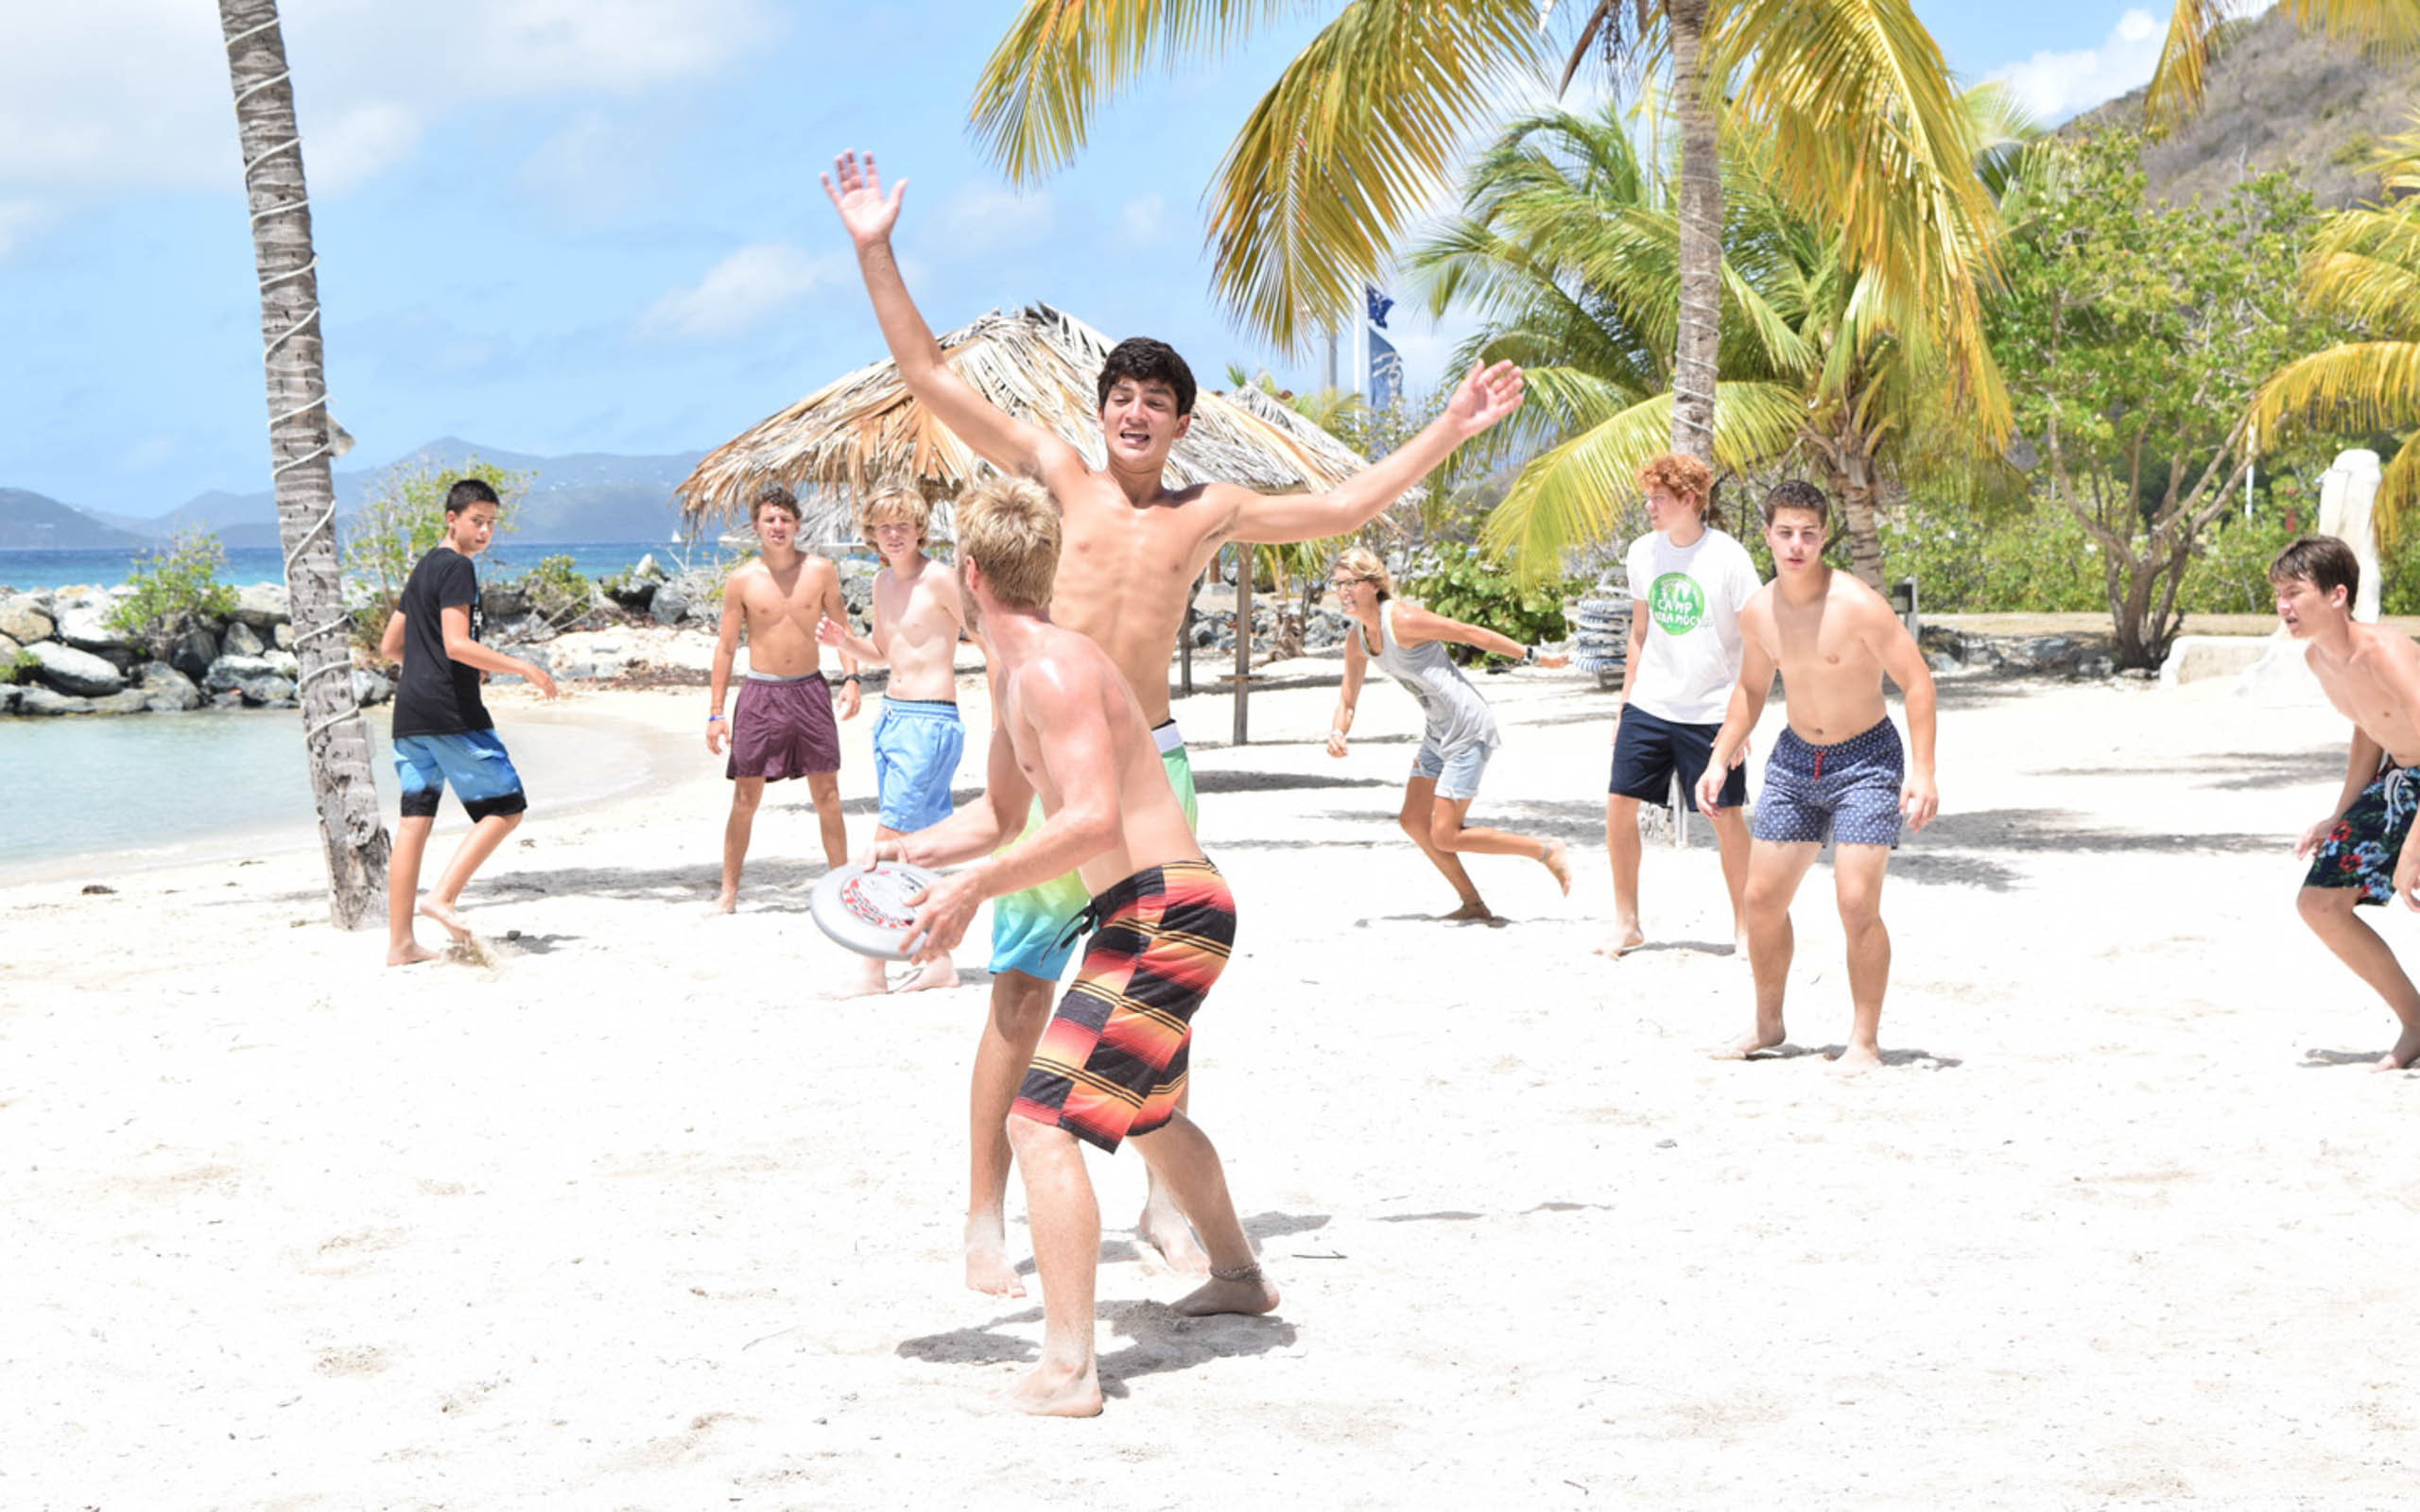 A group of boys playing frisbee on a beach.